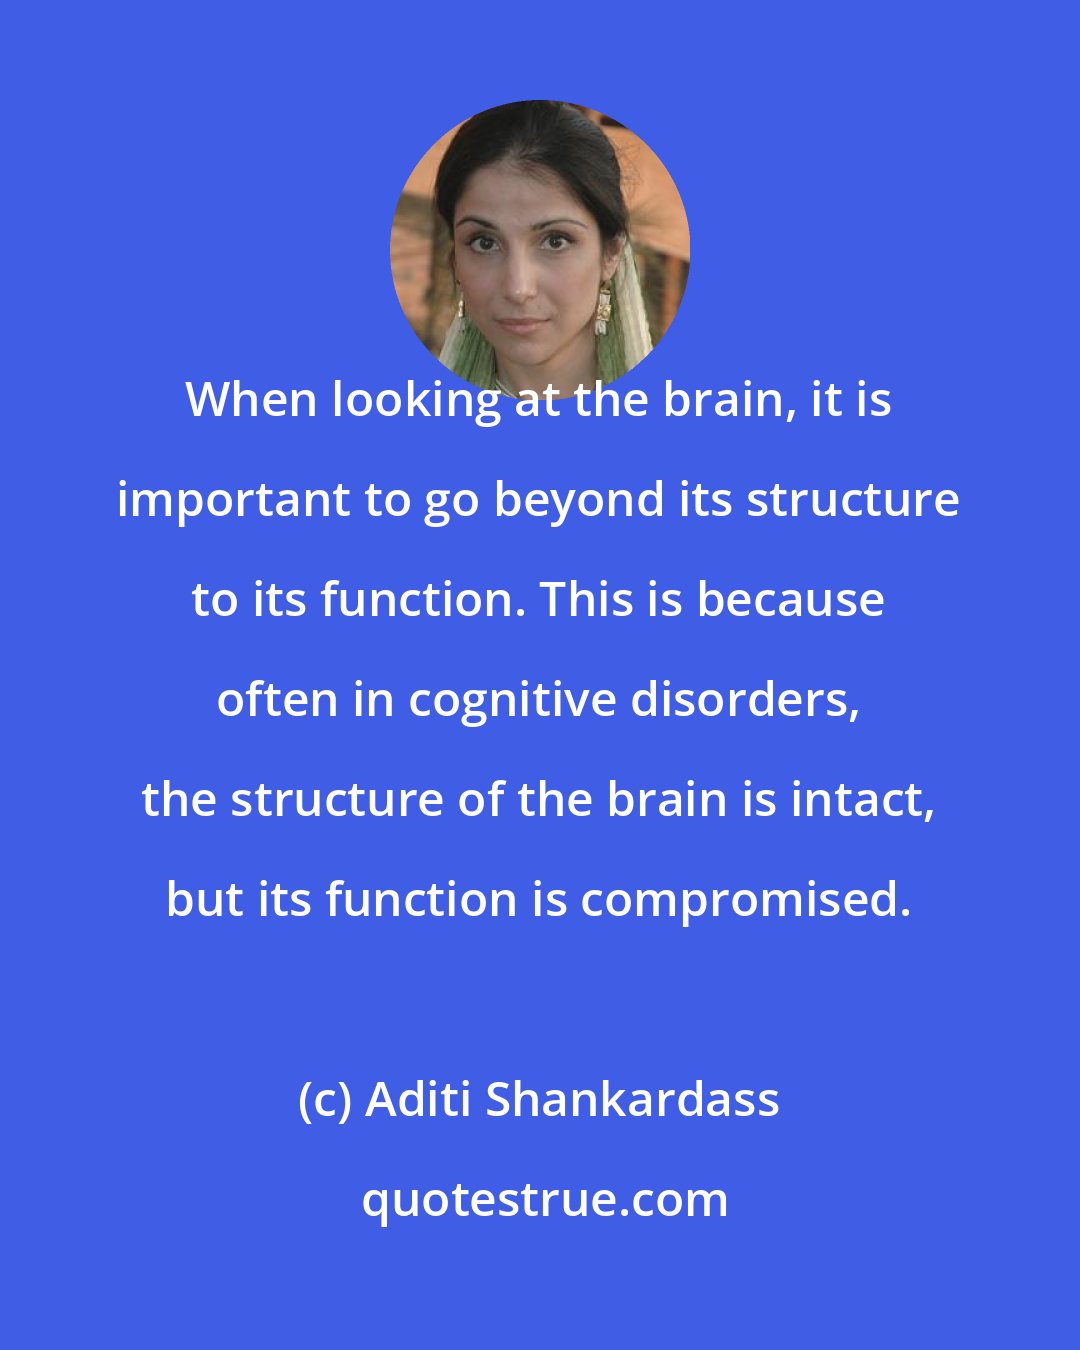 Aditi Shankardass: When looking at the brain, it is important to go beyond its structure to its function. This is because often in cognitive disorders, the structure of the brain is intact, but its function is compromised.